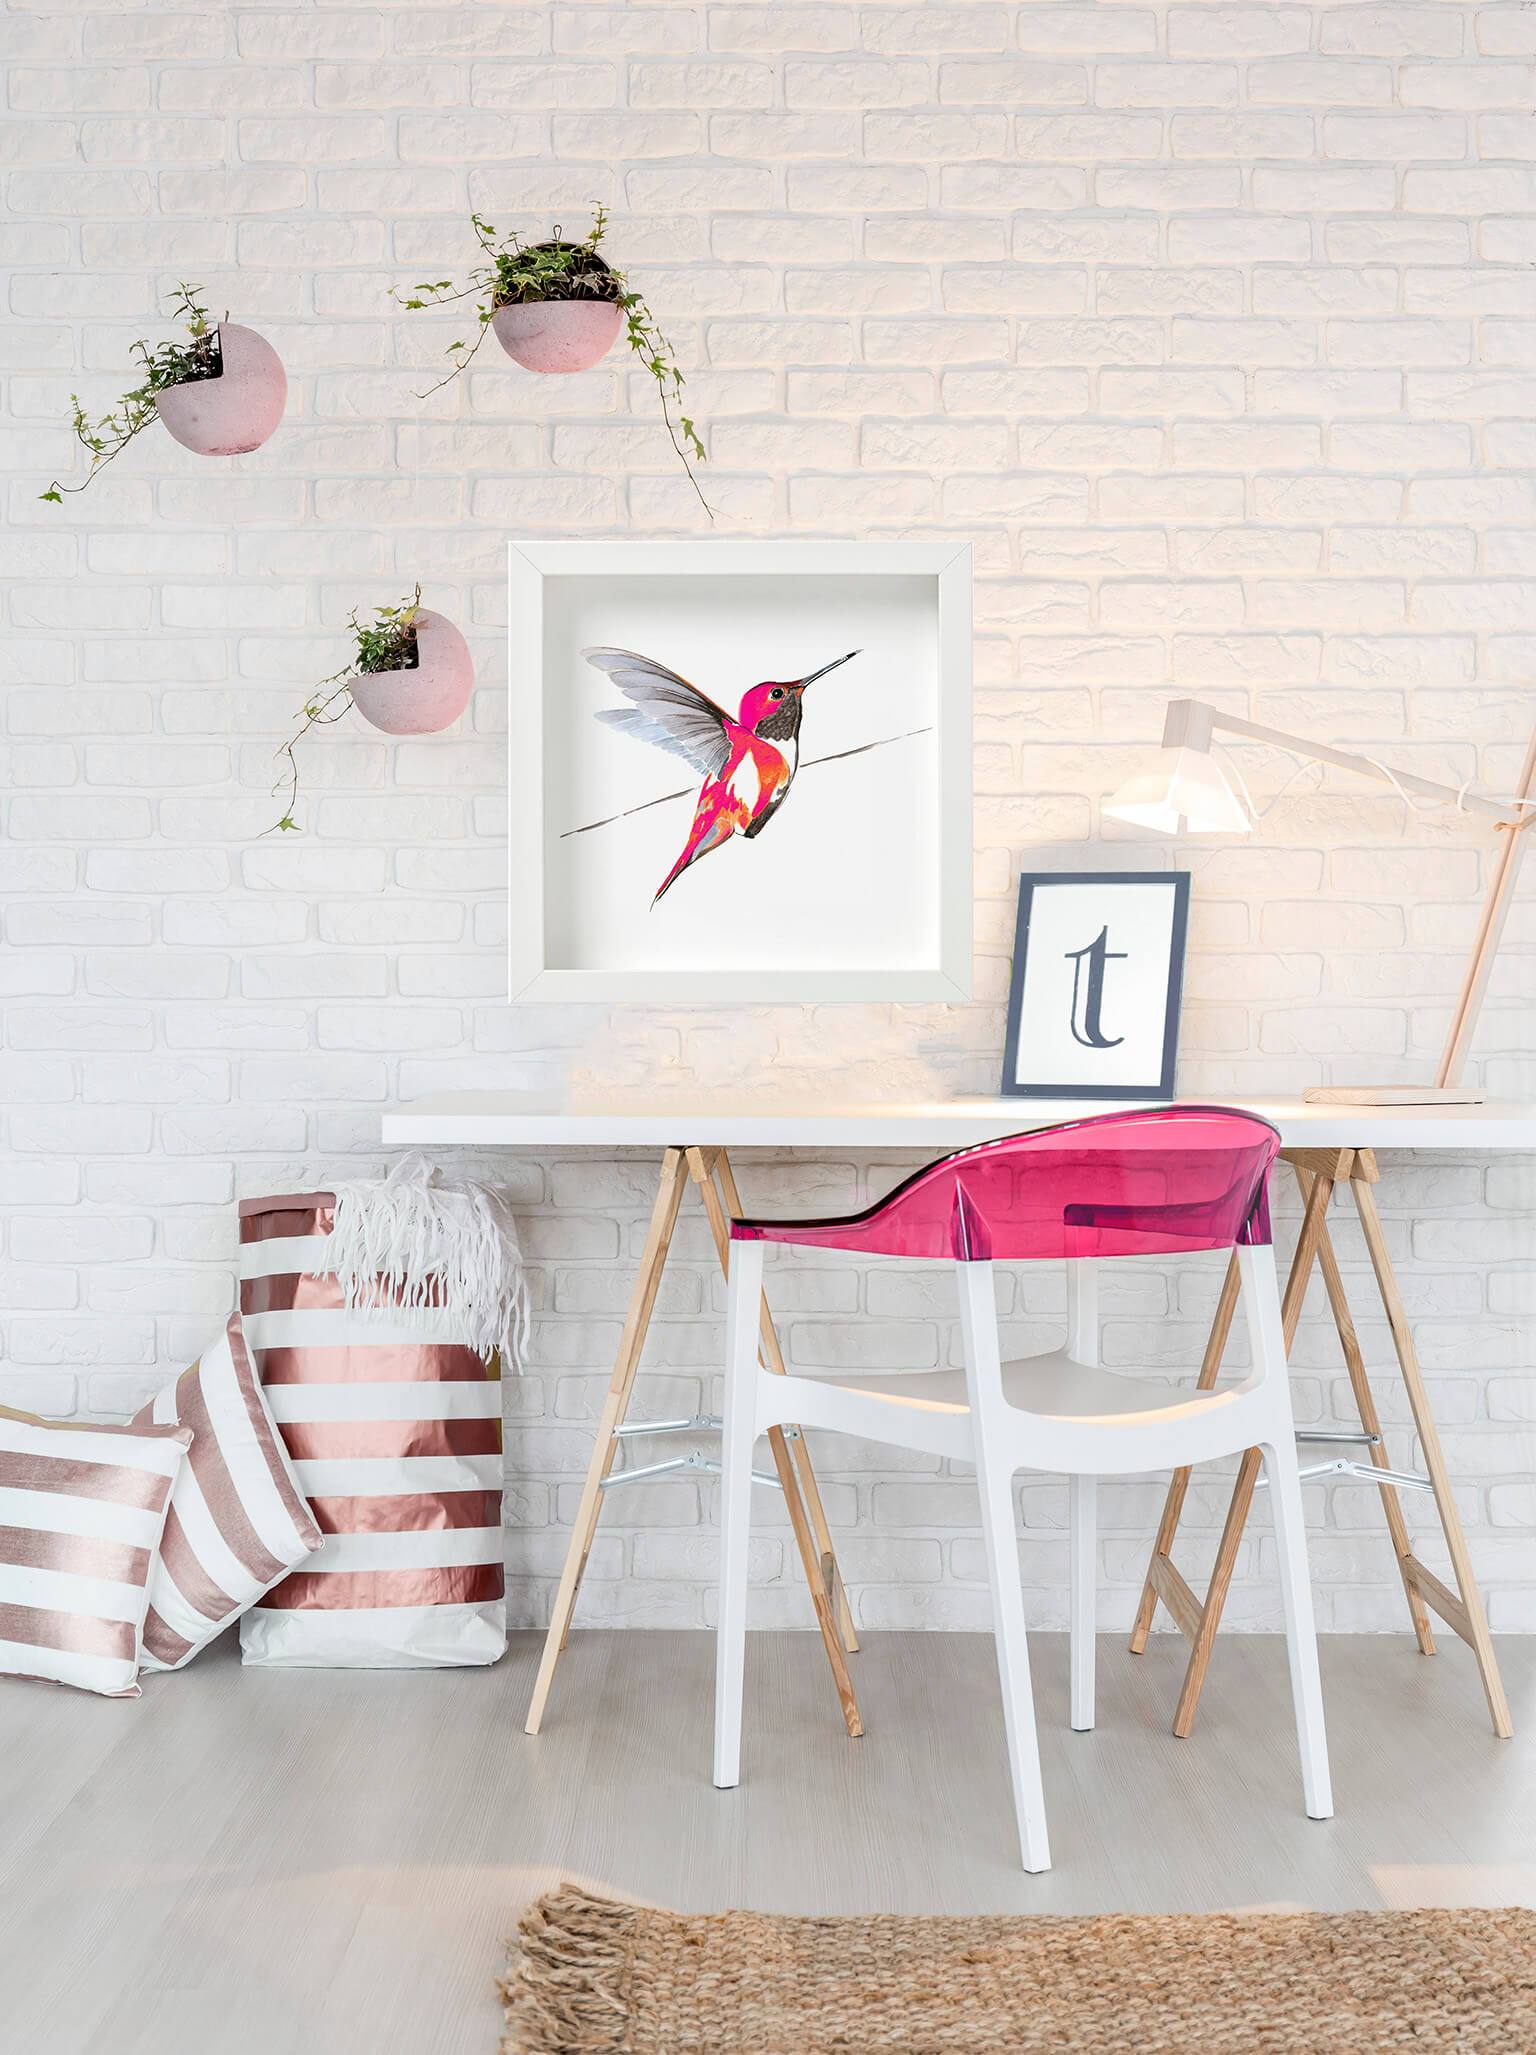 Hummingbird in bright pink print by Anna Jacobs